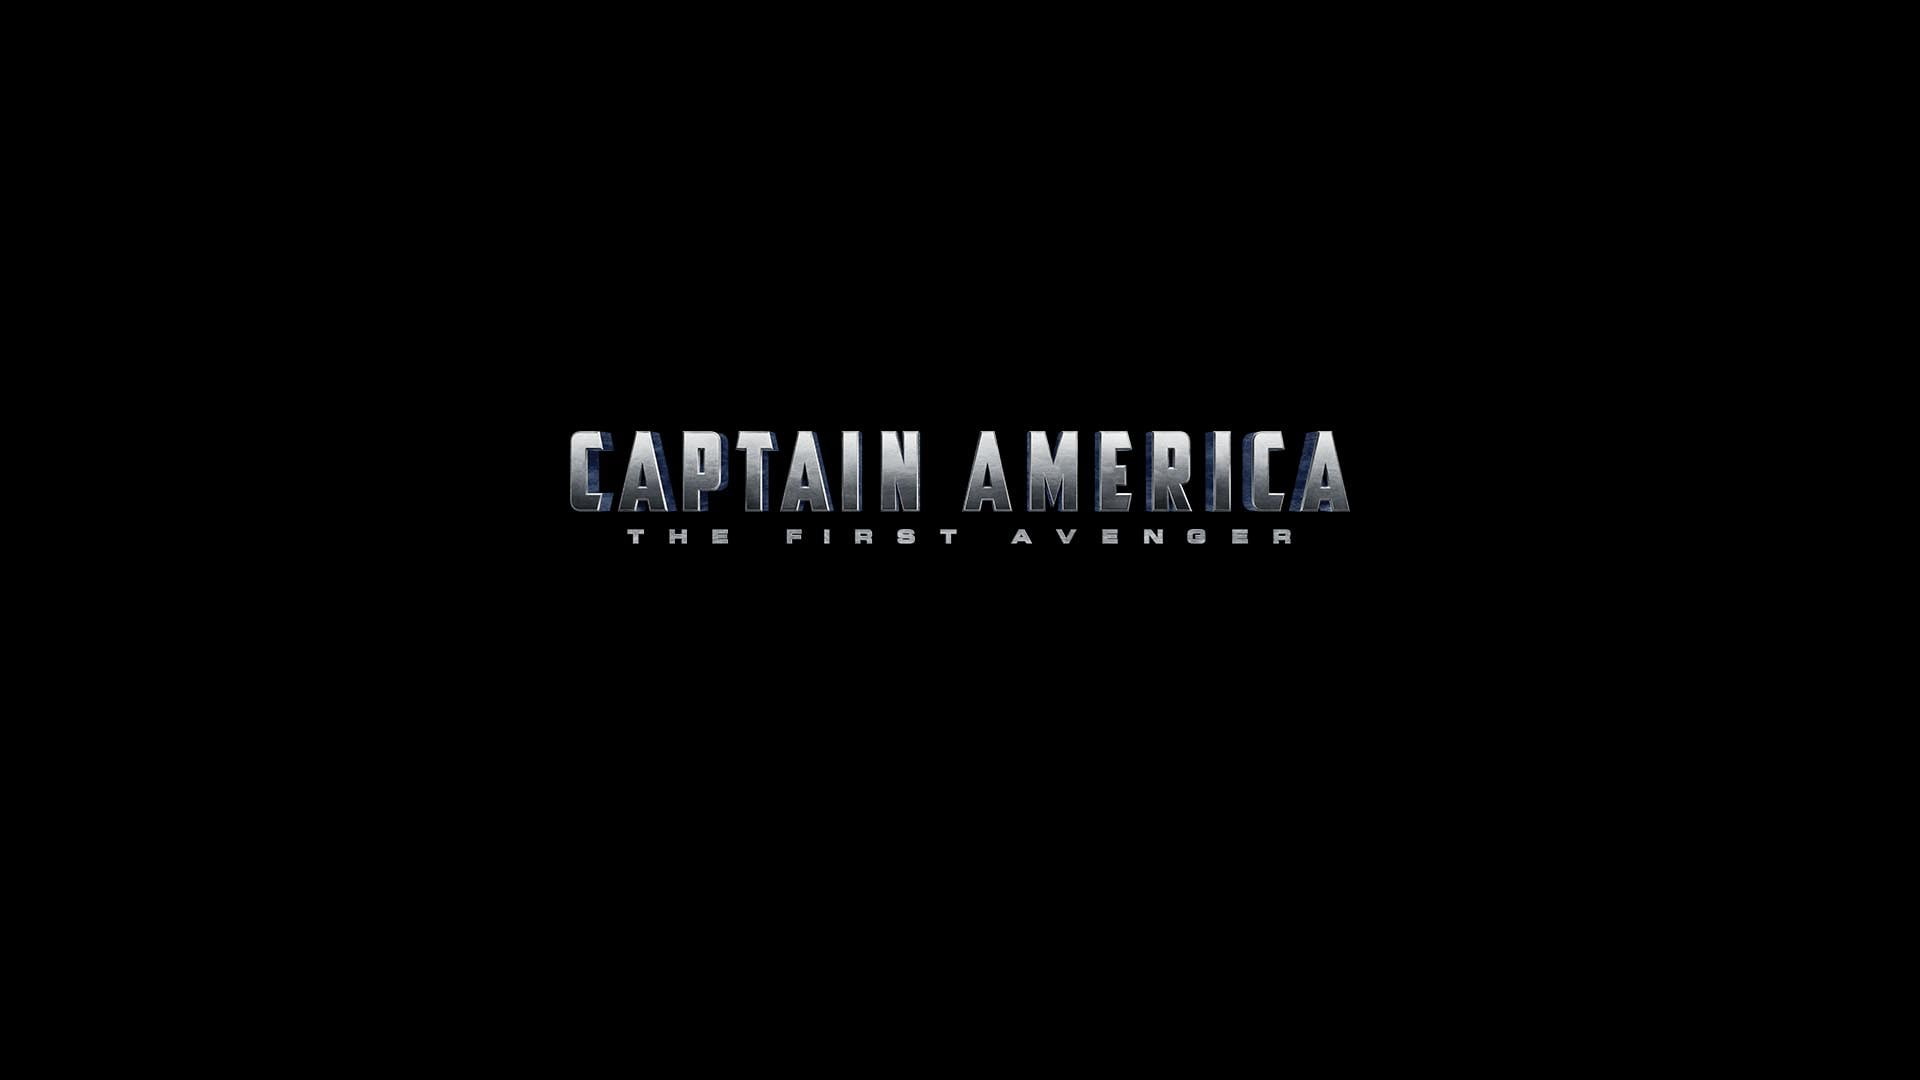 captain america the first avenger, copy space, no people, dark